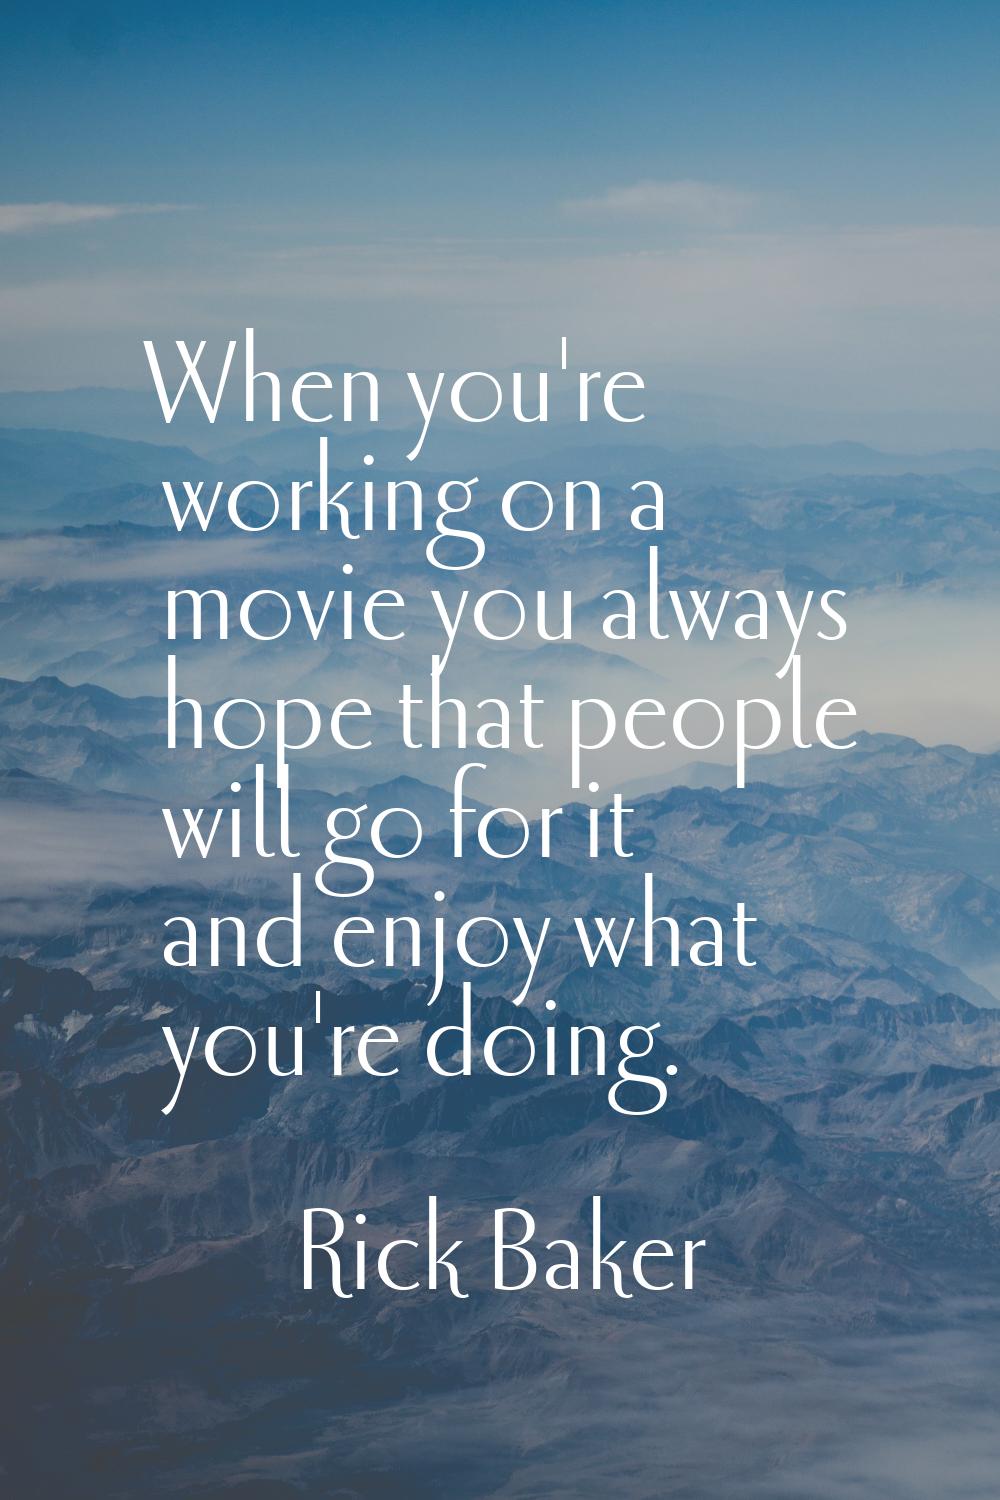 When you're working on a movie you always hope that people will go for it and enjoy what you're doi